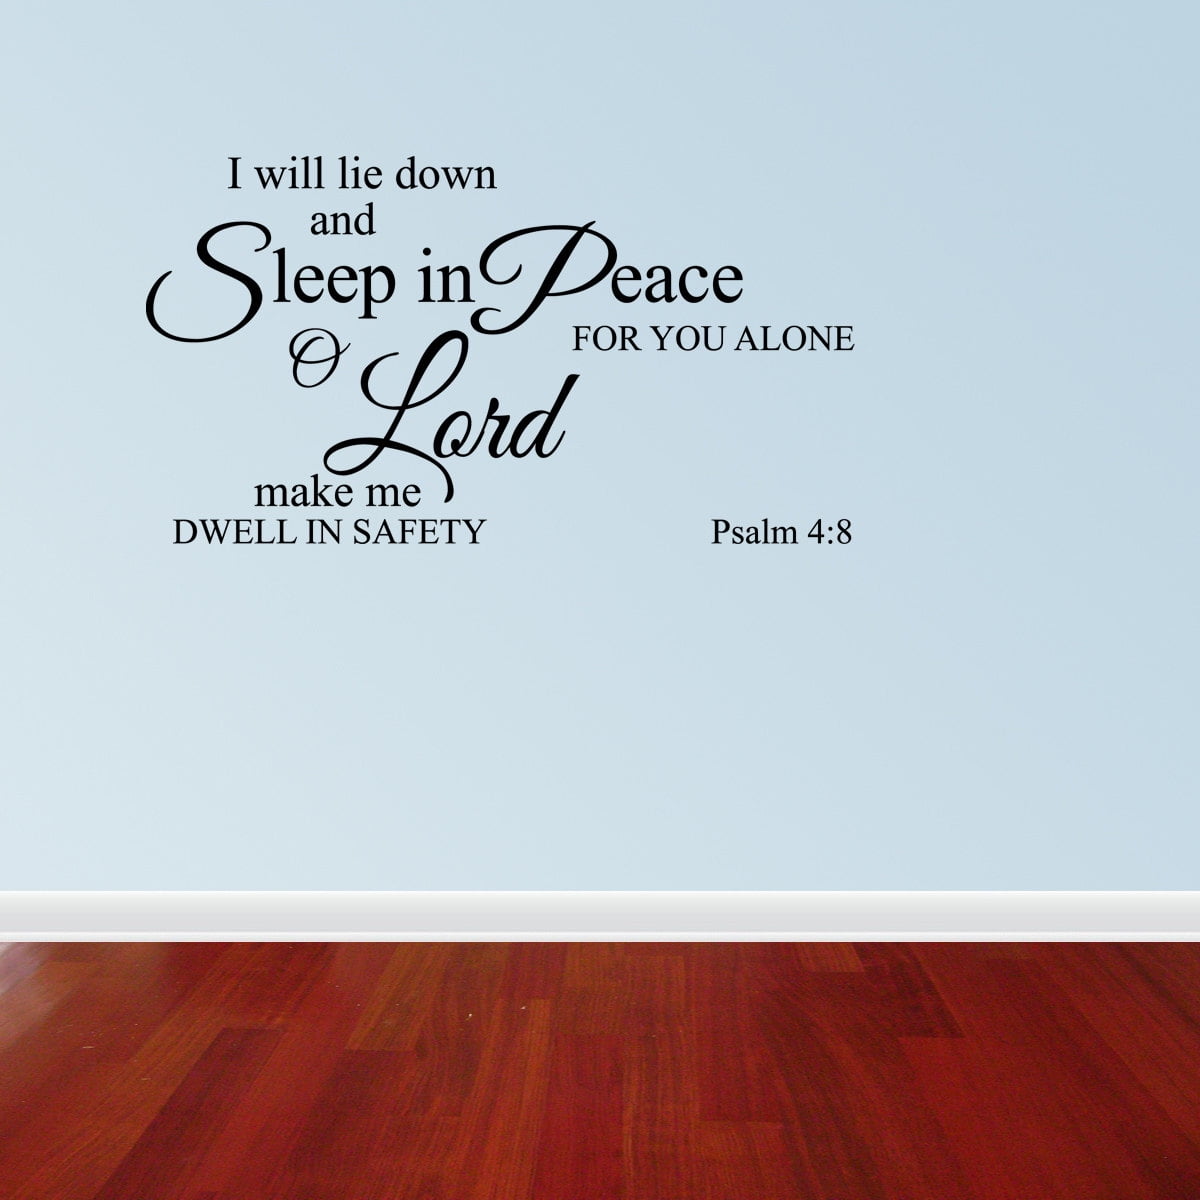 Details about   PSALMS 4:8 I WILL LIE DOWN & SLEEP RELIGIOUS WALL DECAL VINYL QUOTE SCRIPTURE 